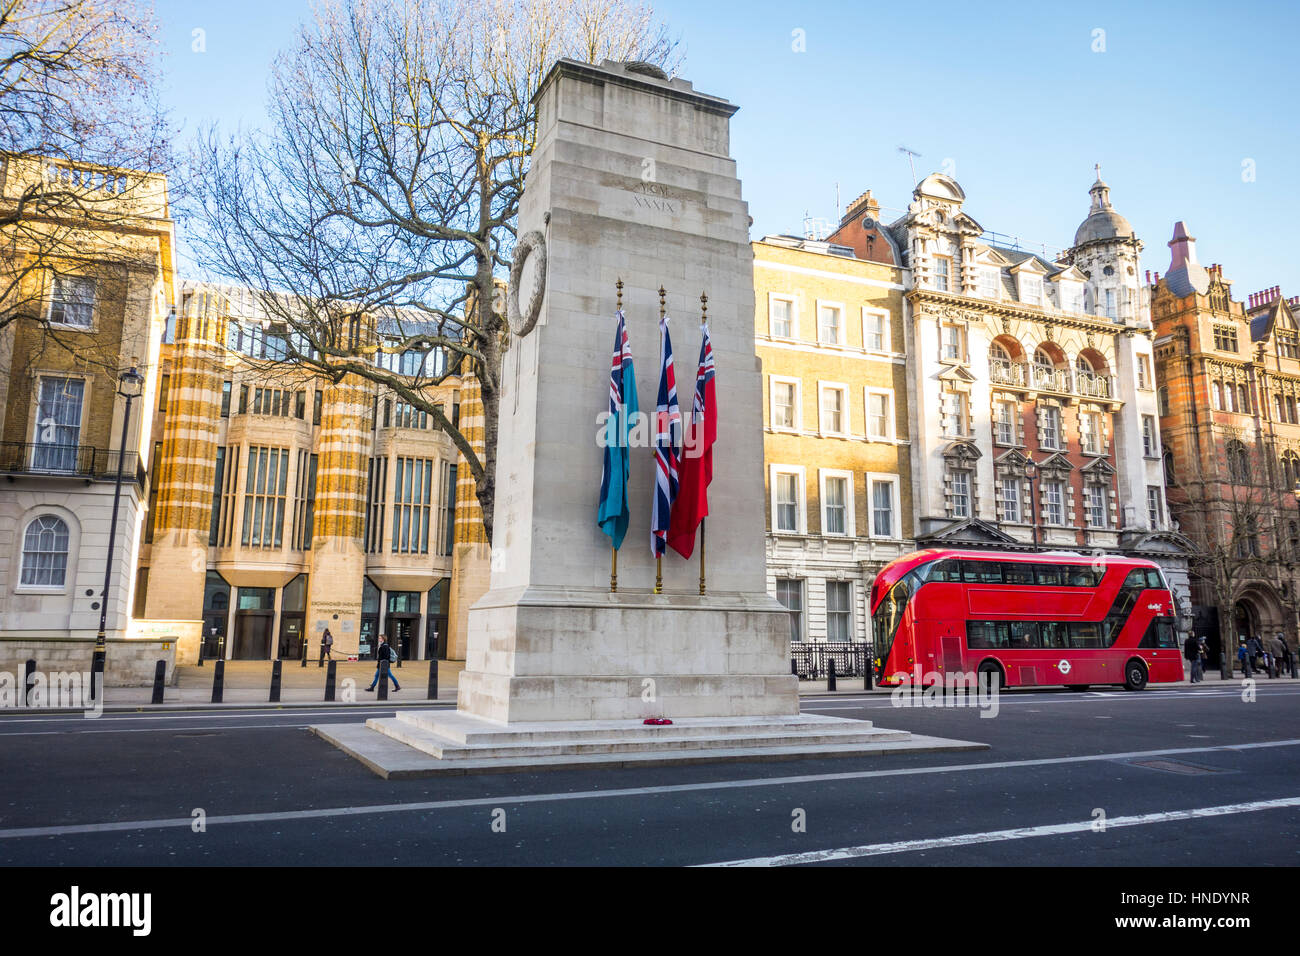 New routemaster red bus next to the Cenotaph on Whitehall. London, UK Stock Photo